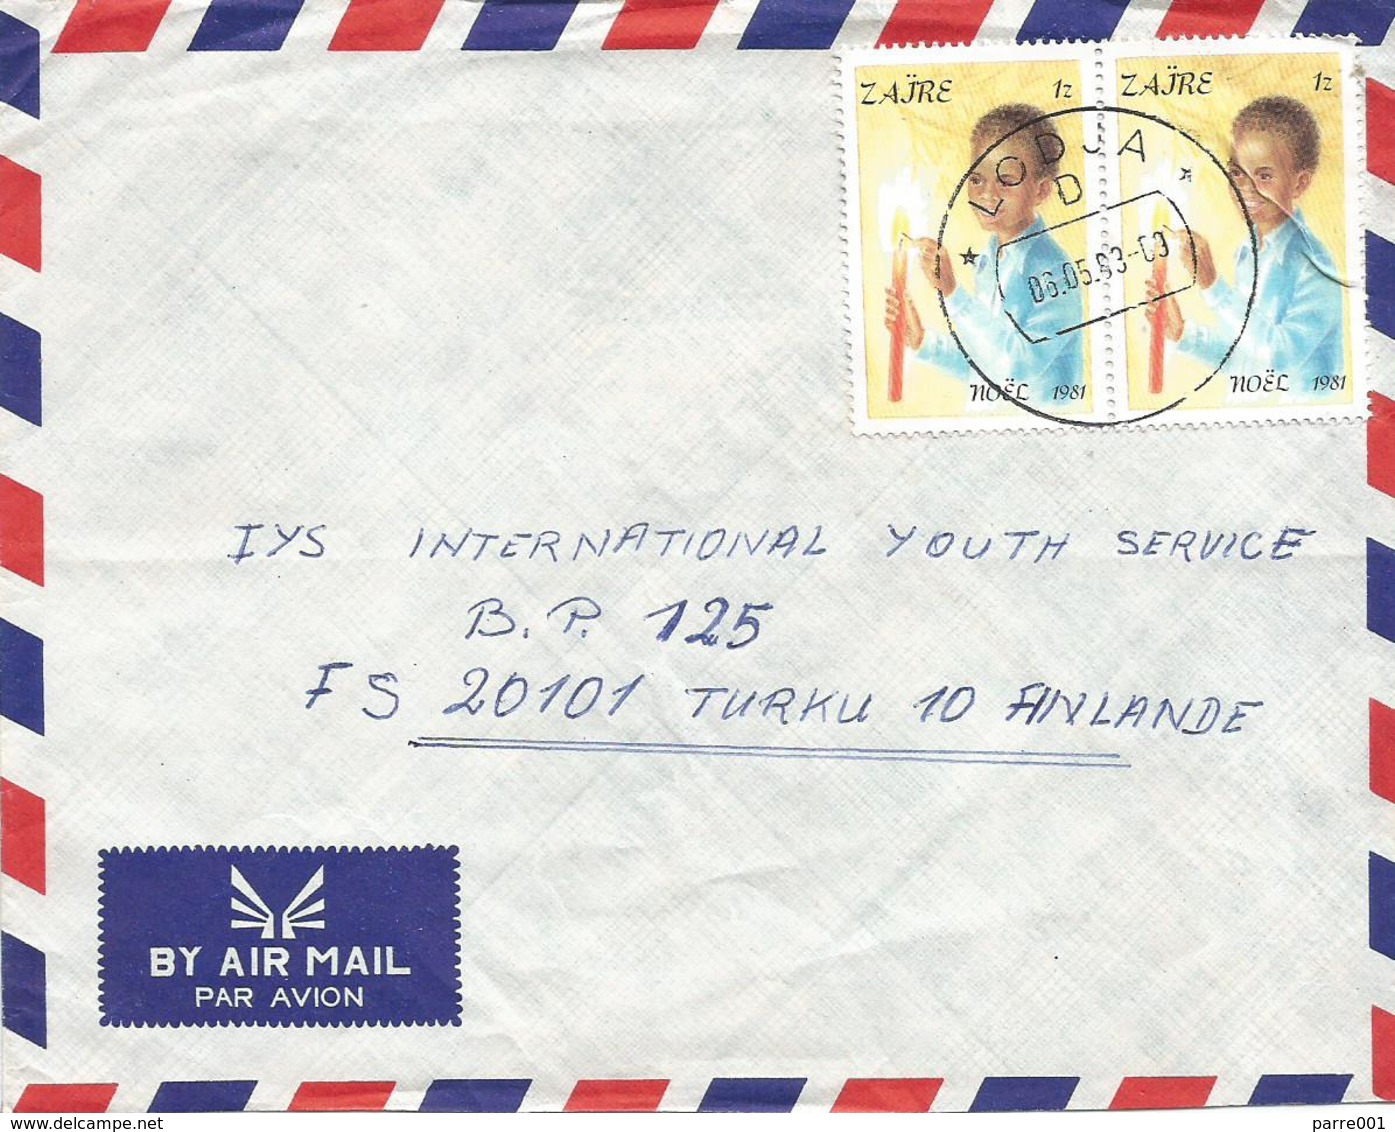 DRC RDC Zaire Congo 1983 Lodja Code Letter D Noel Christmas Candle 1Z Cover - Used Stamps